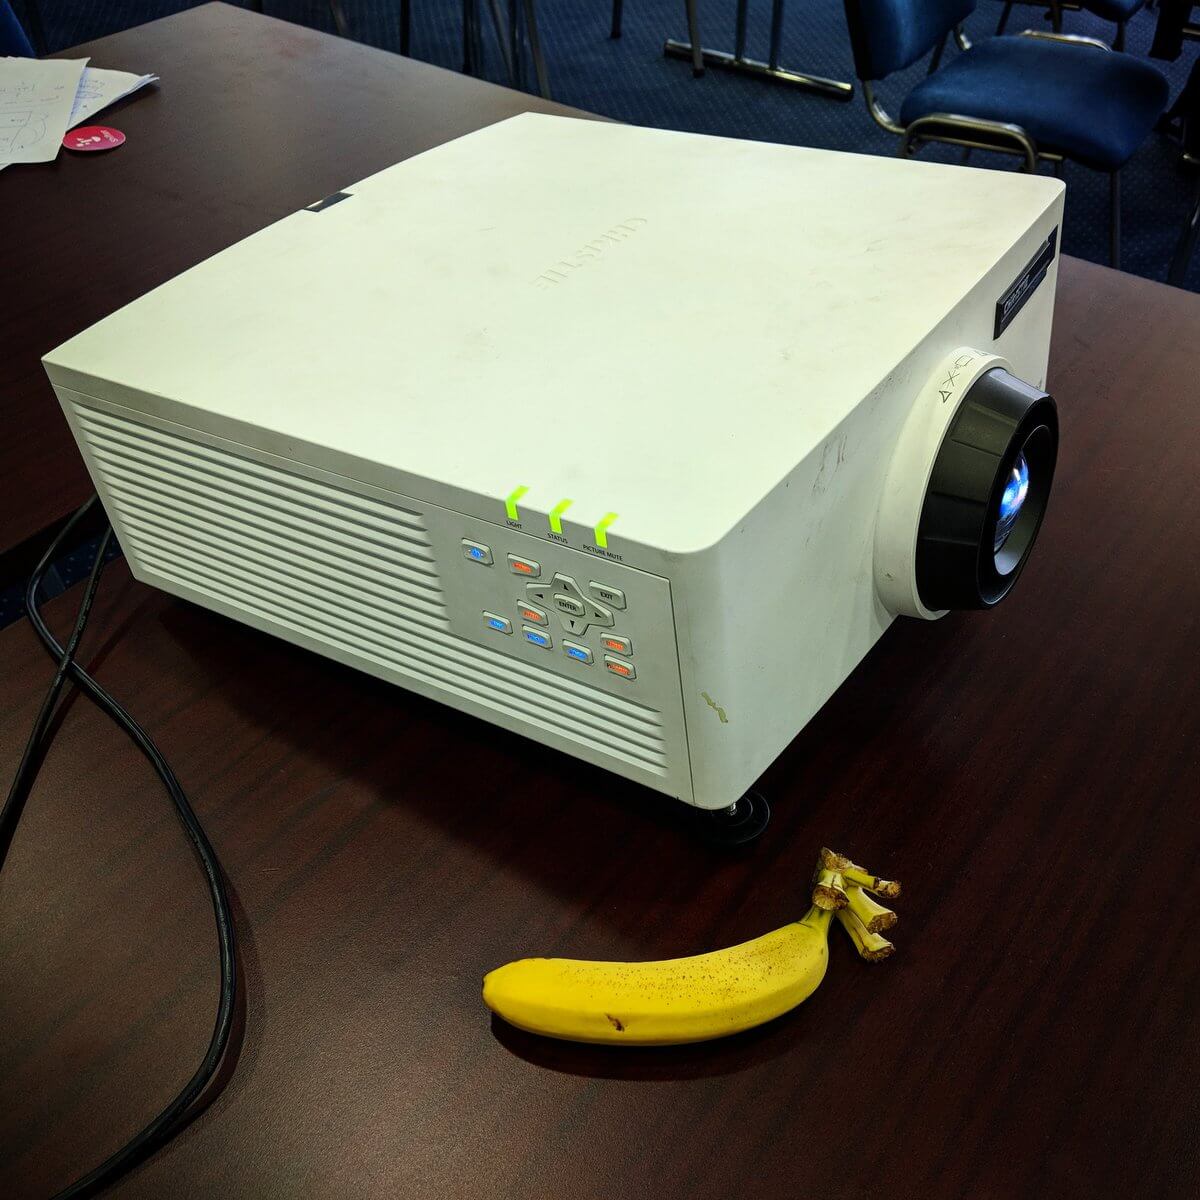 A large computer projector with a worn cover.  It is about a foot-and-a-half square and two-thirds as tall. It has a bank of status lights on one side. Beside it is a banana, dwarfed by the projector.